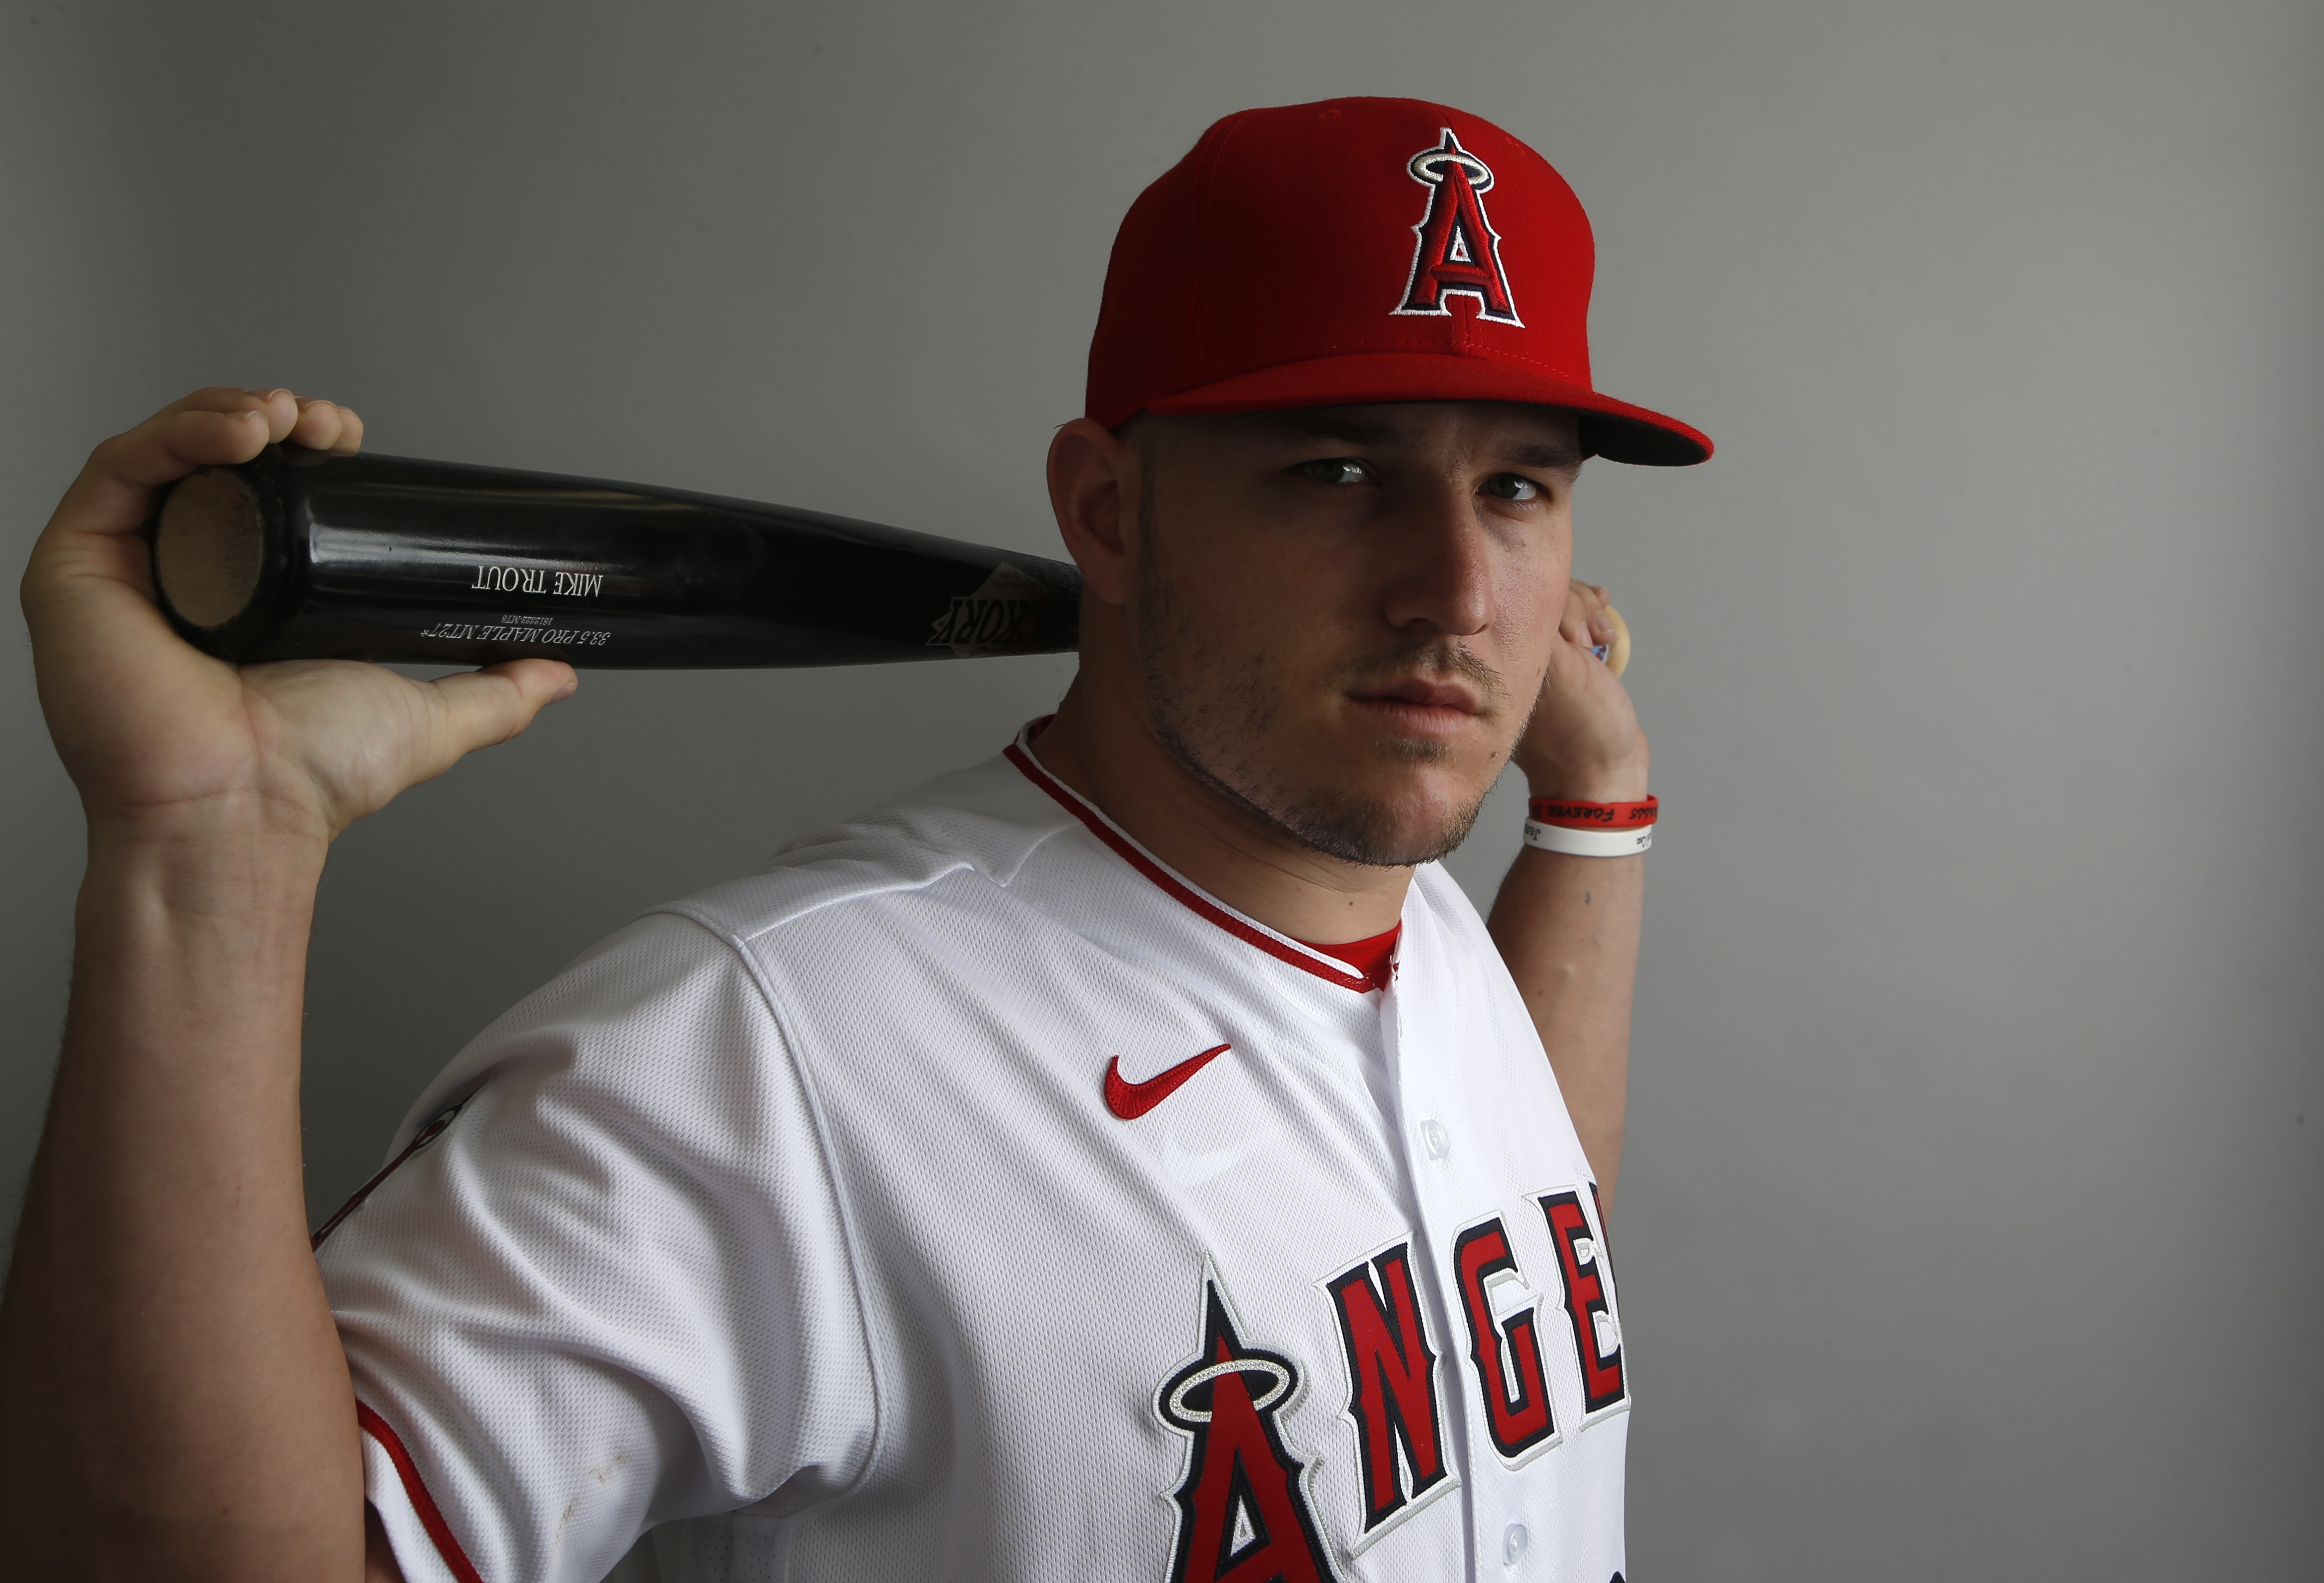 angels new jersey